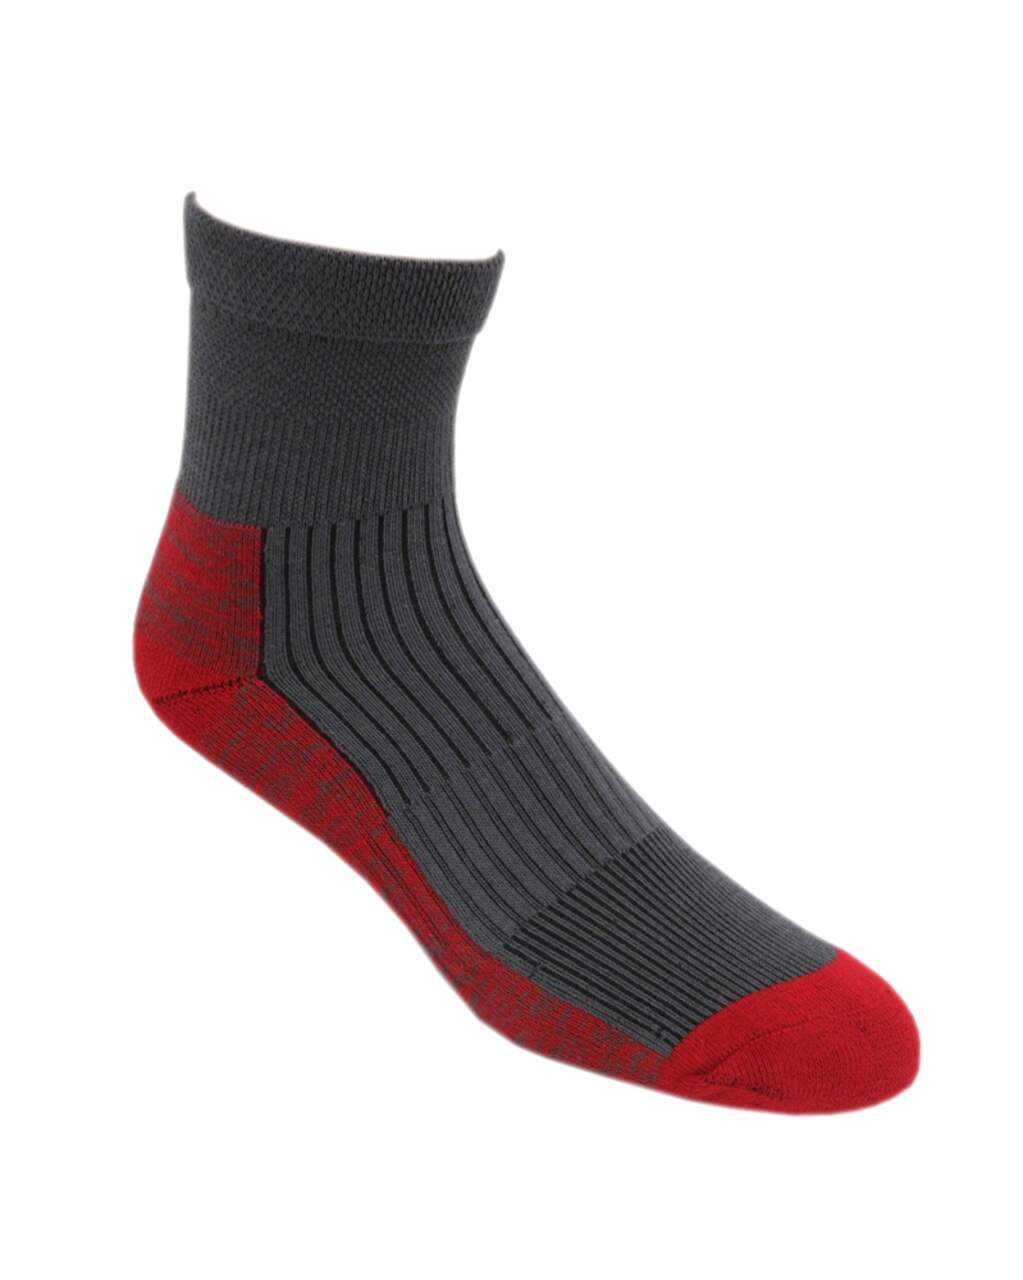 Outbound Men's Ankle Socks, Red/Grey